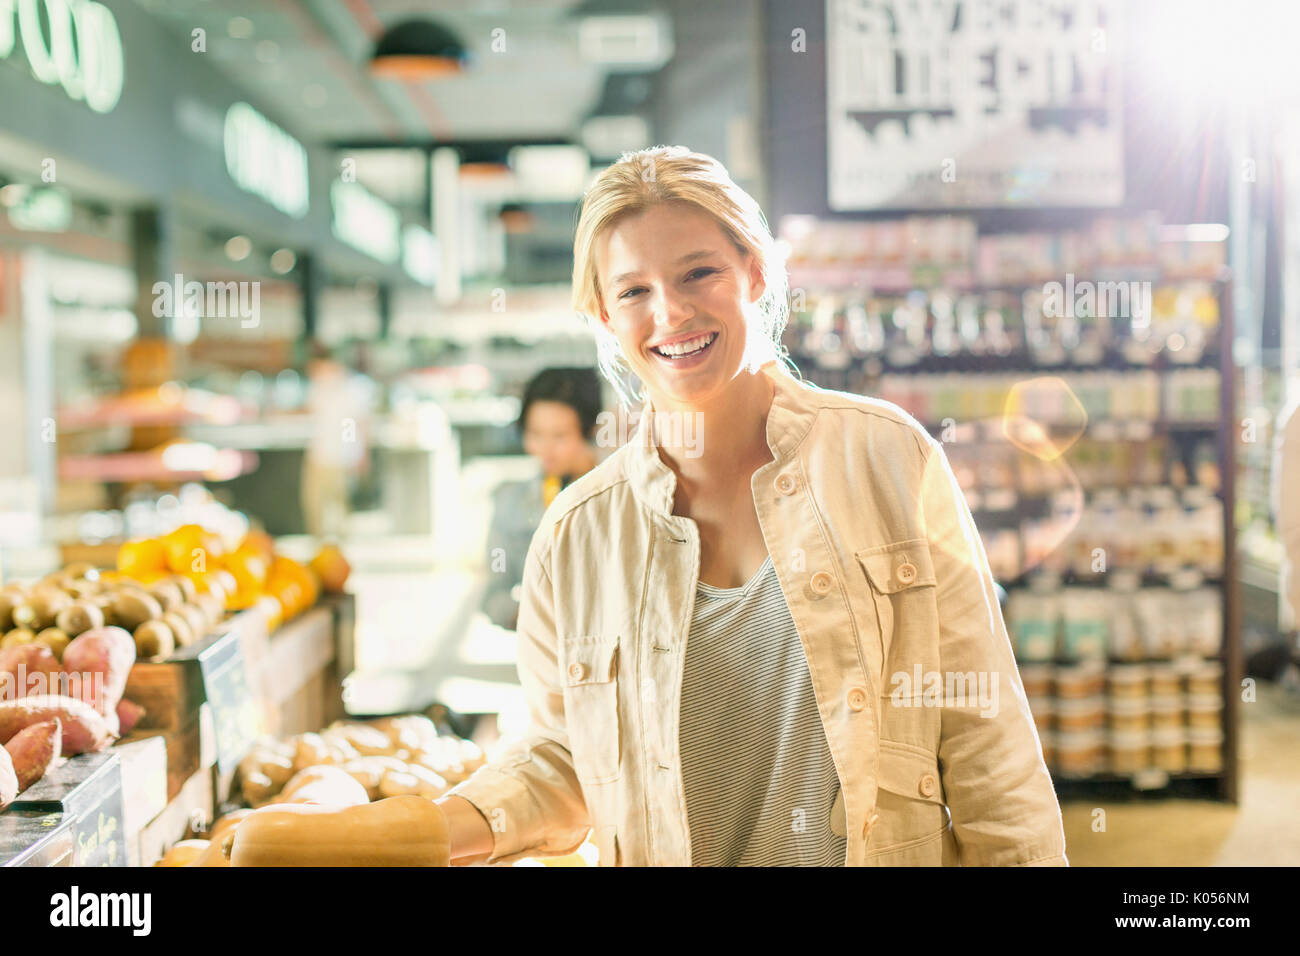 Portrait smiling young woman grocery shopping in market Stock Photo